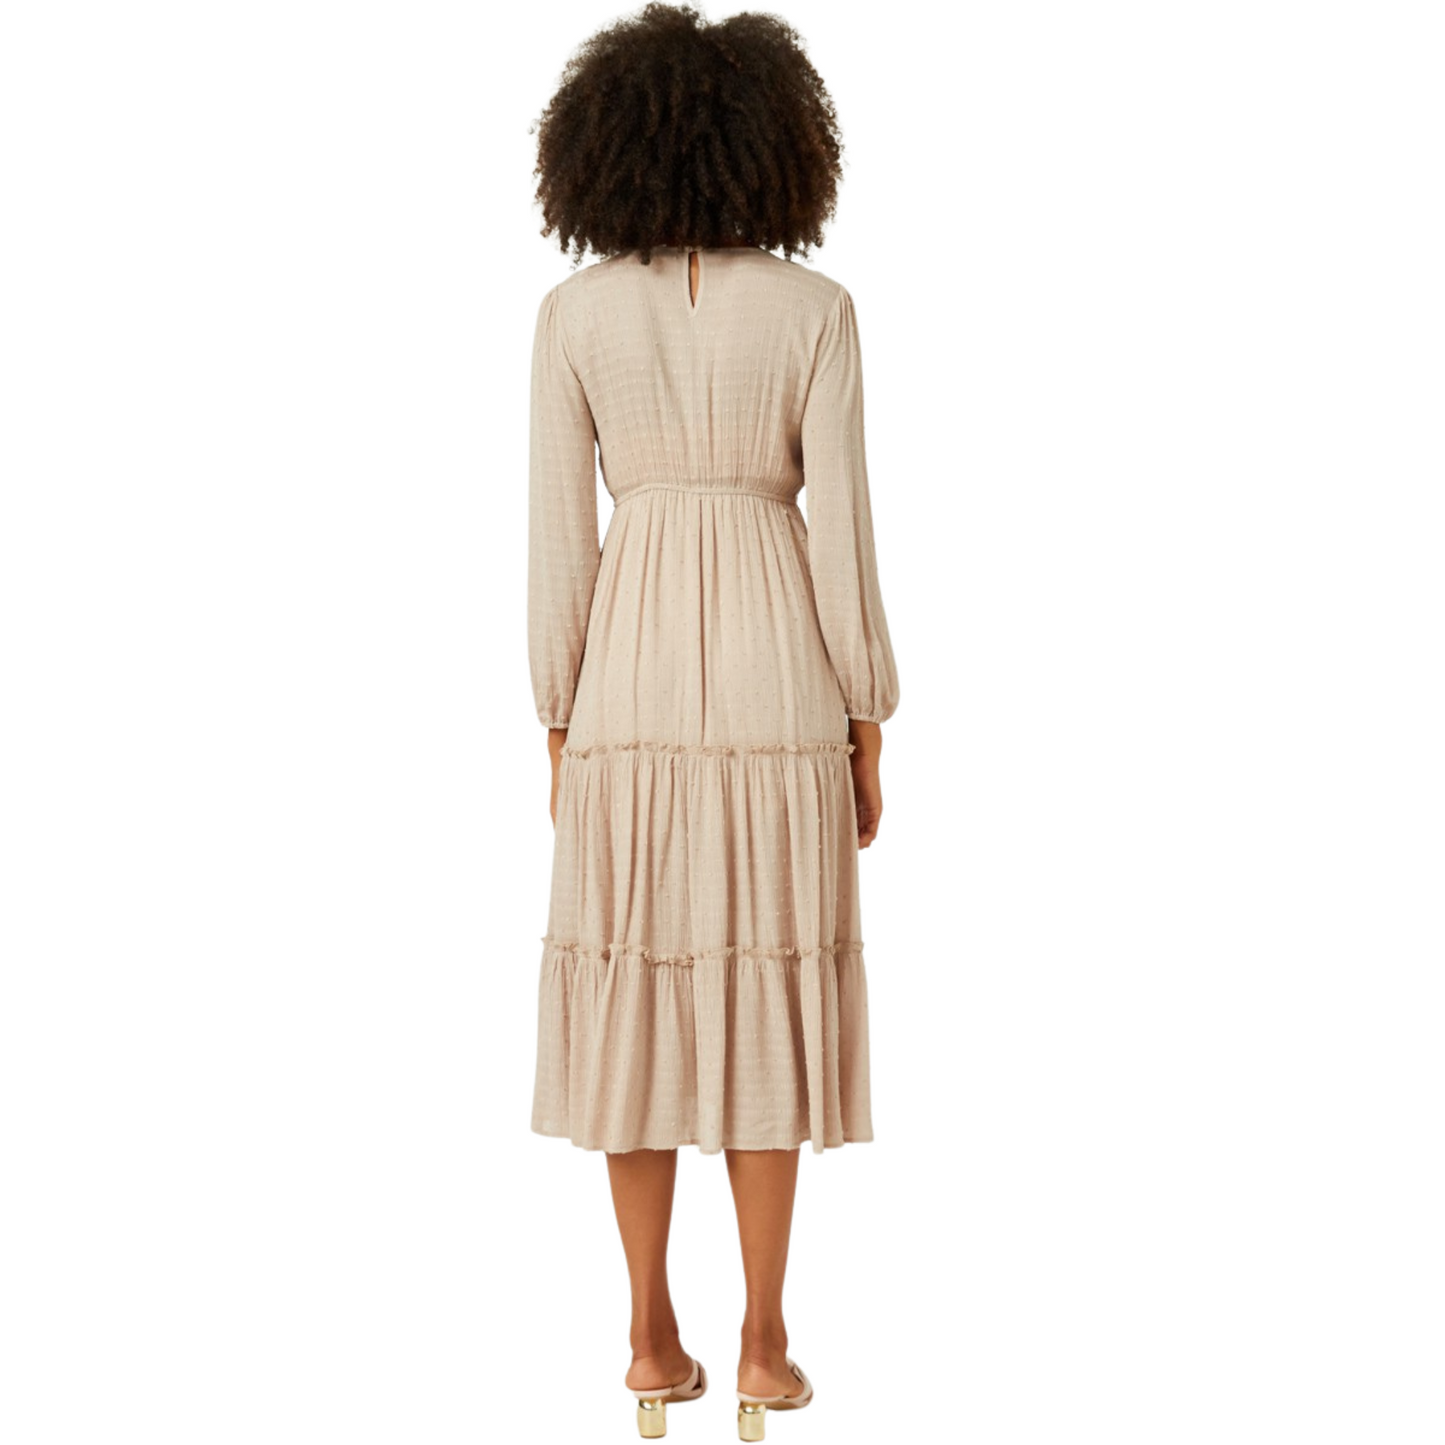 This fashion-forward Swiss dot tiered dress is perfect for any occasion. Made of lightweight woven fabric, this cream-colored maxi dress features a flattering v-neckline, back keyhole closure, and a dress lining for added comfort. Enjoy a feminine and timeless look!